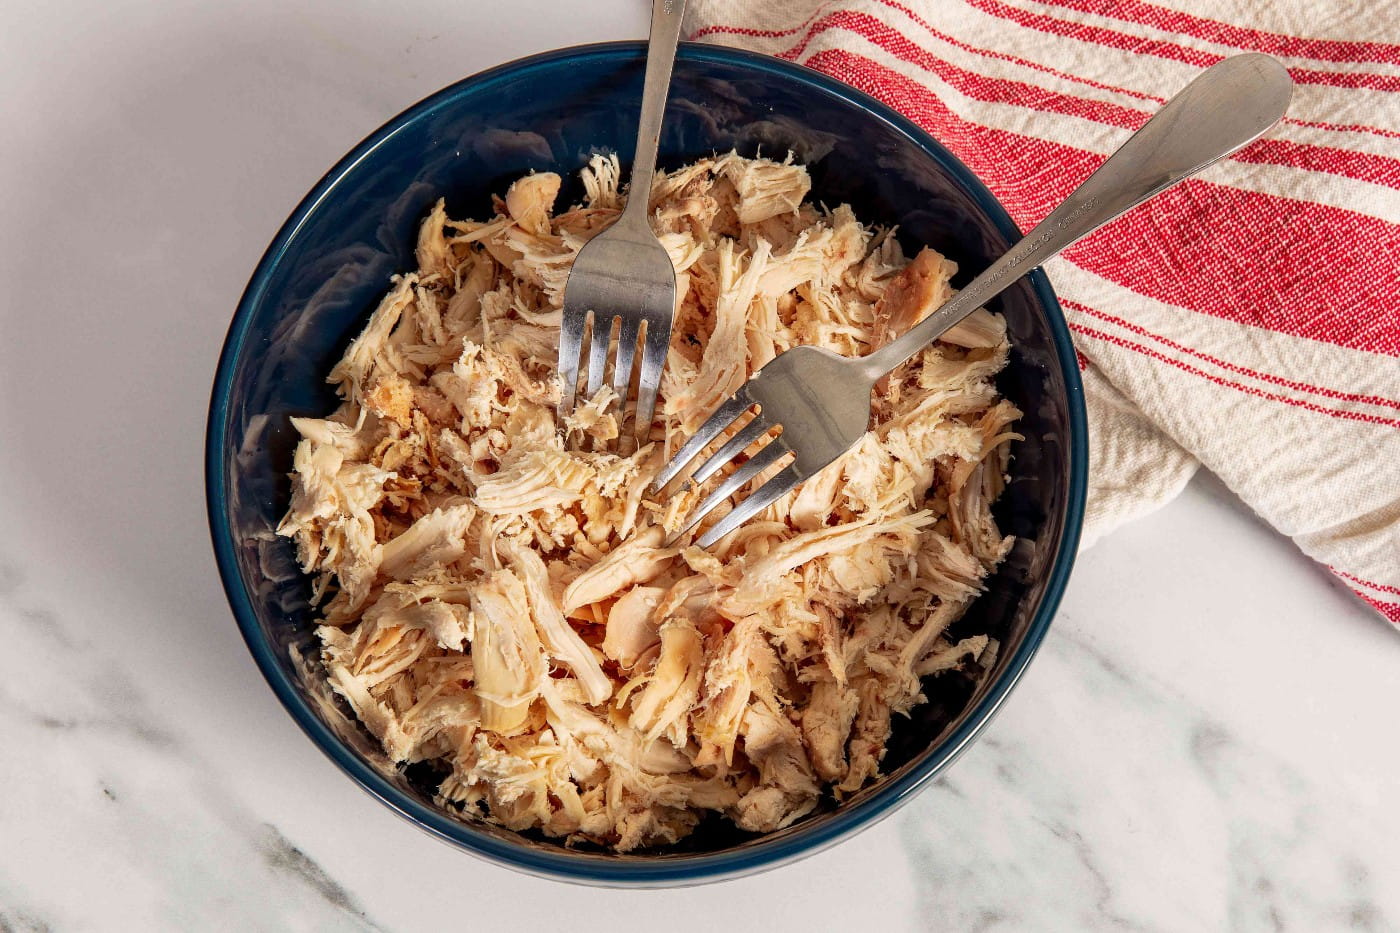 https://www.mccormick.com/-/media/project/oneweb/mccormick-us/mccormick/articles/shredded-chicken-is-the-easiest-meal-prep-hack-url.jpeg?rev=9fab5e0c1227486f908ec31a81669d2c&vd=20230615T090434Z&hash=30BA8E8DF3B95A44D6DB6DA20628956A